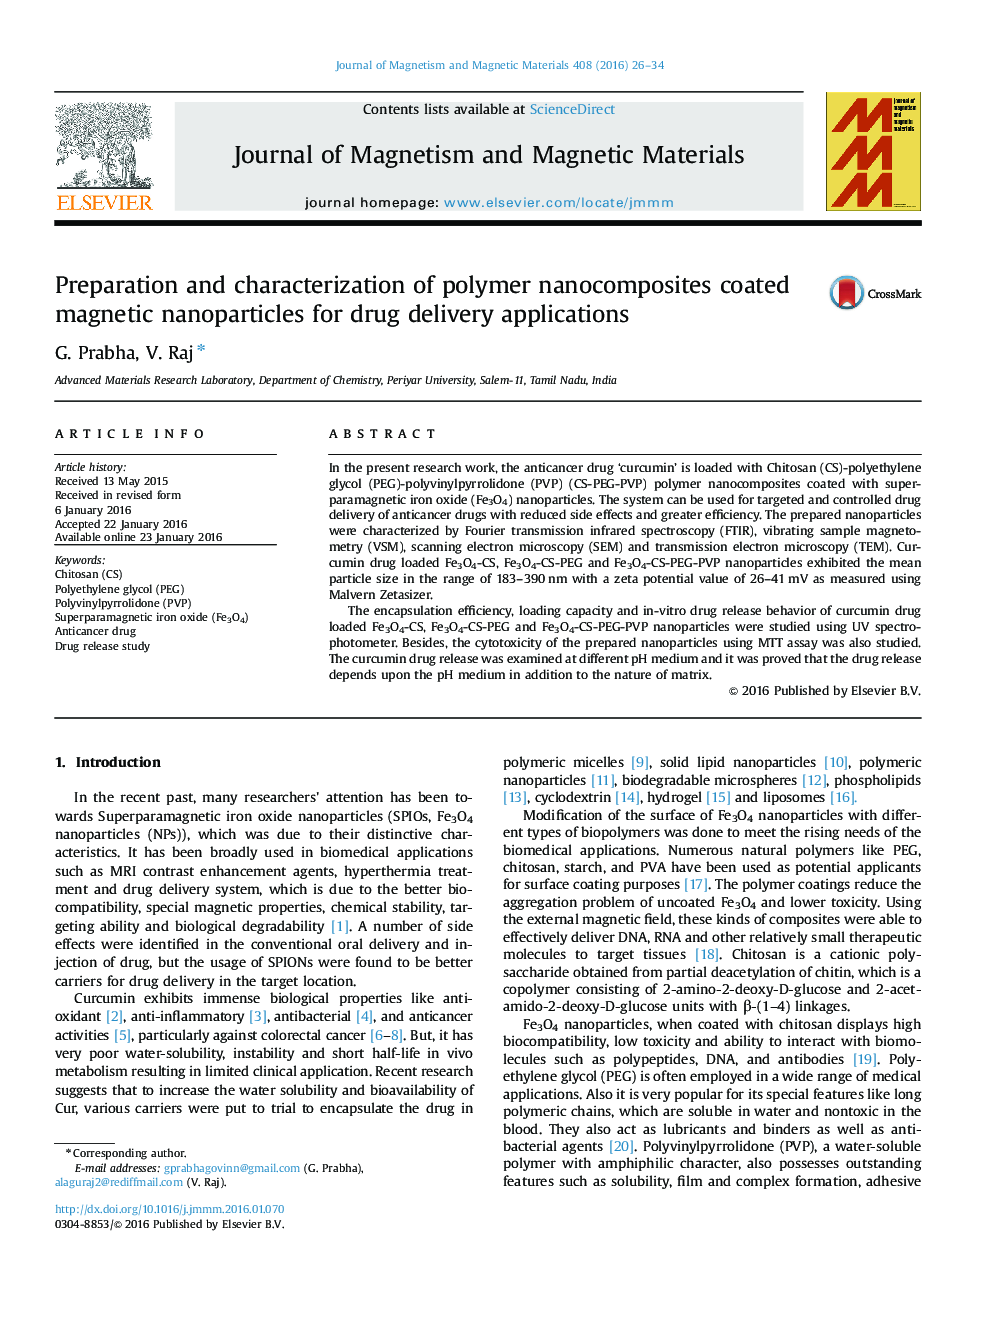 Preparation and characterization of polymer nanocomposites coated magnetic nanoparticles for drug delivery applications